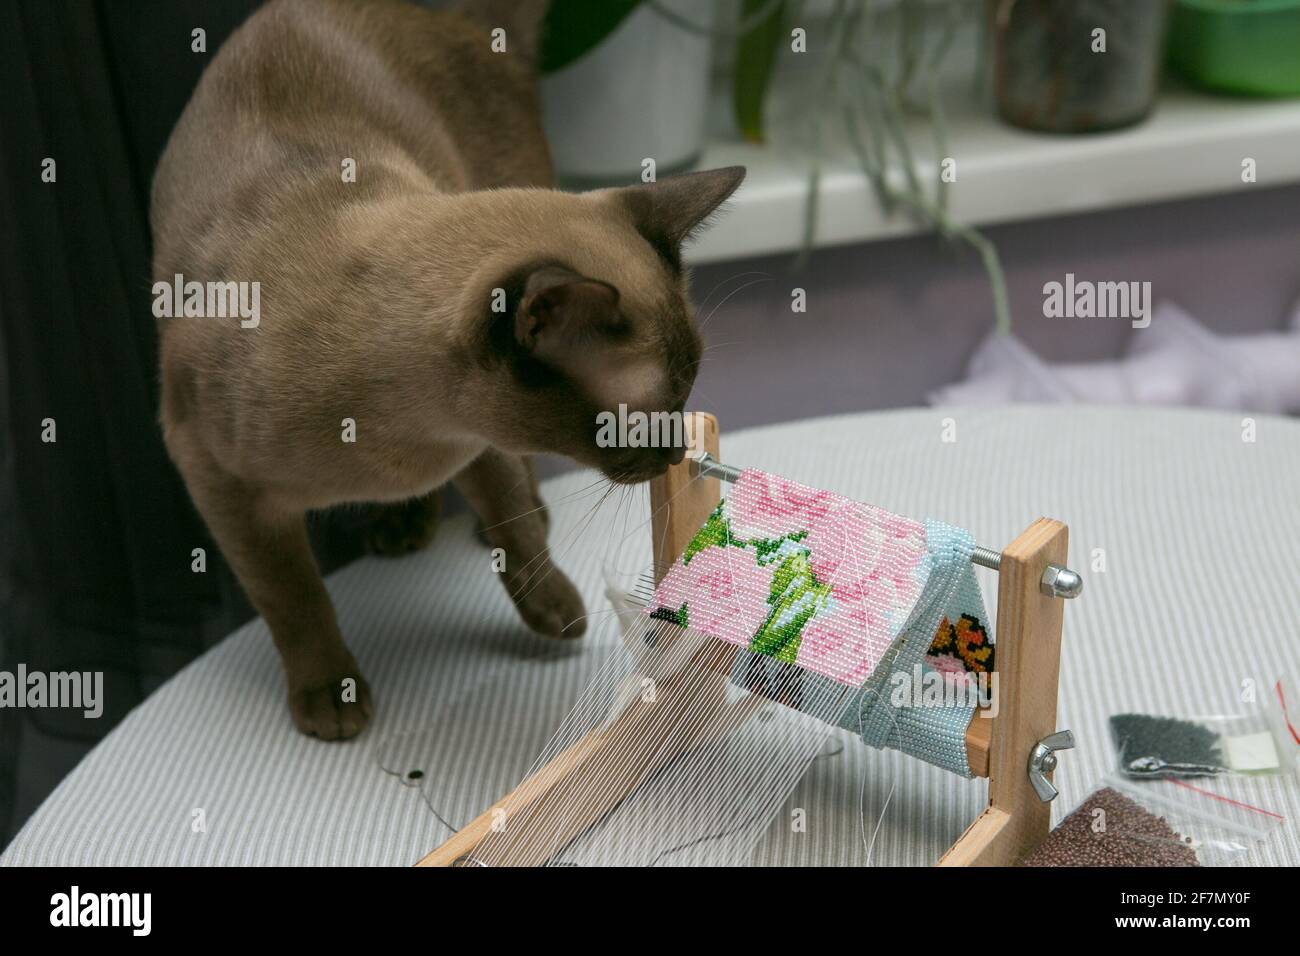 Weaving from beads. Curious domestic Siamese cat is interested in bead jewelry. The braiding machine and beads are ready for work. Stock Photo